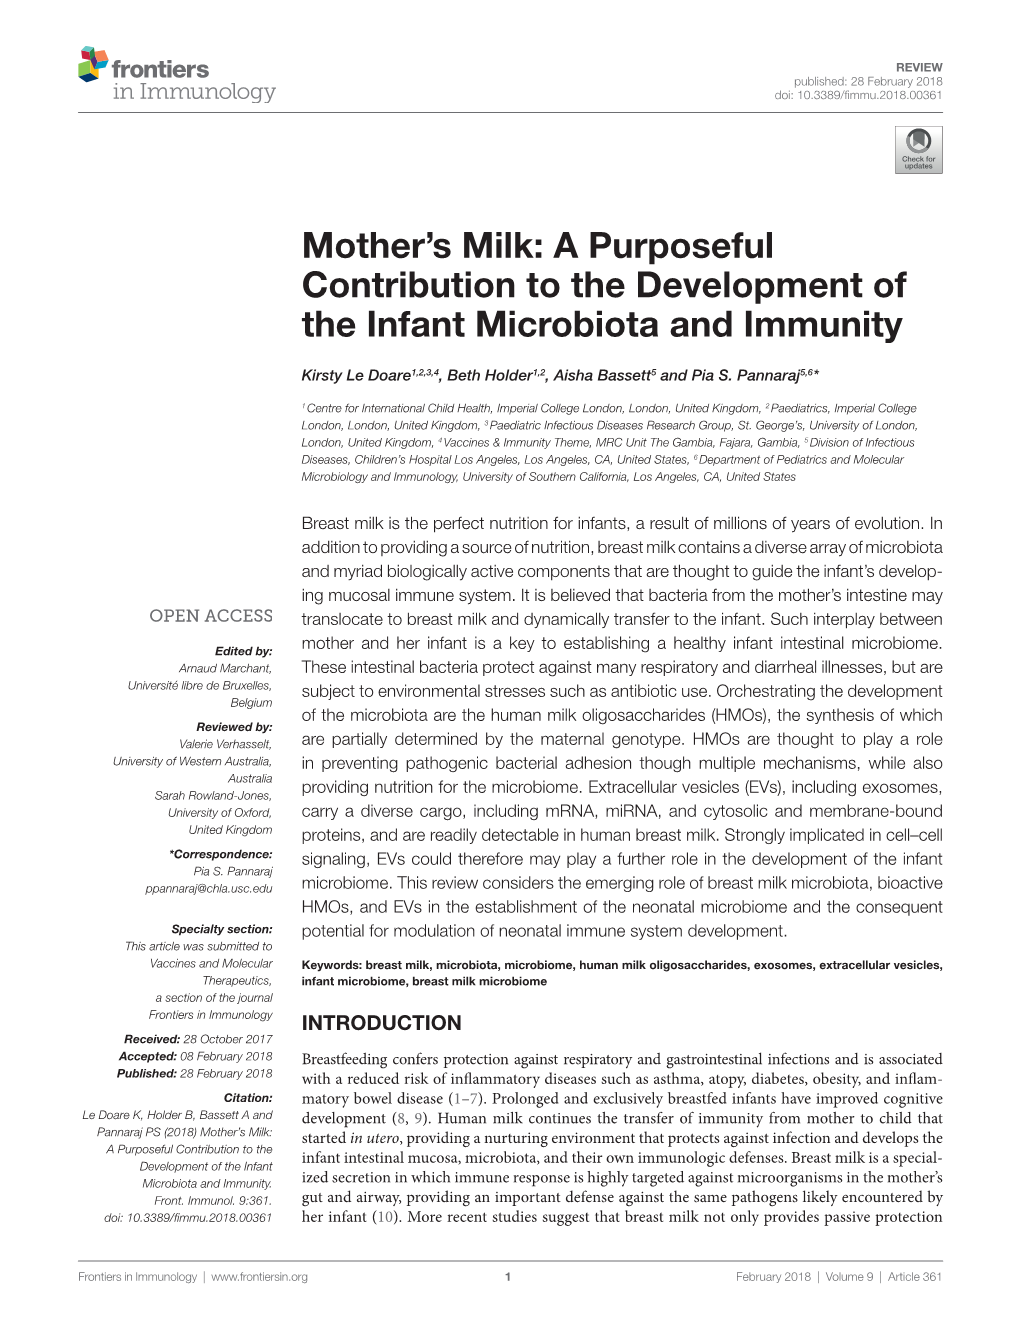 Mother's Milk: a Purposeful Contribution to the Development of the Infant Microbiota and Immunity